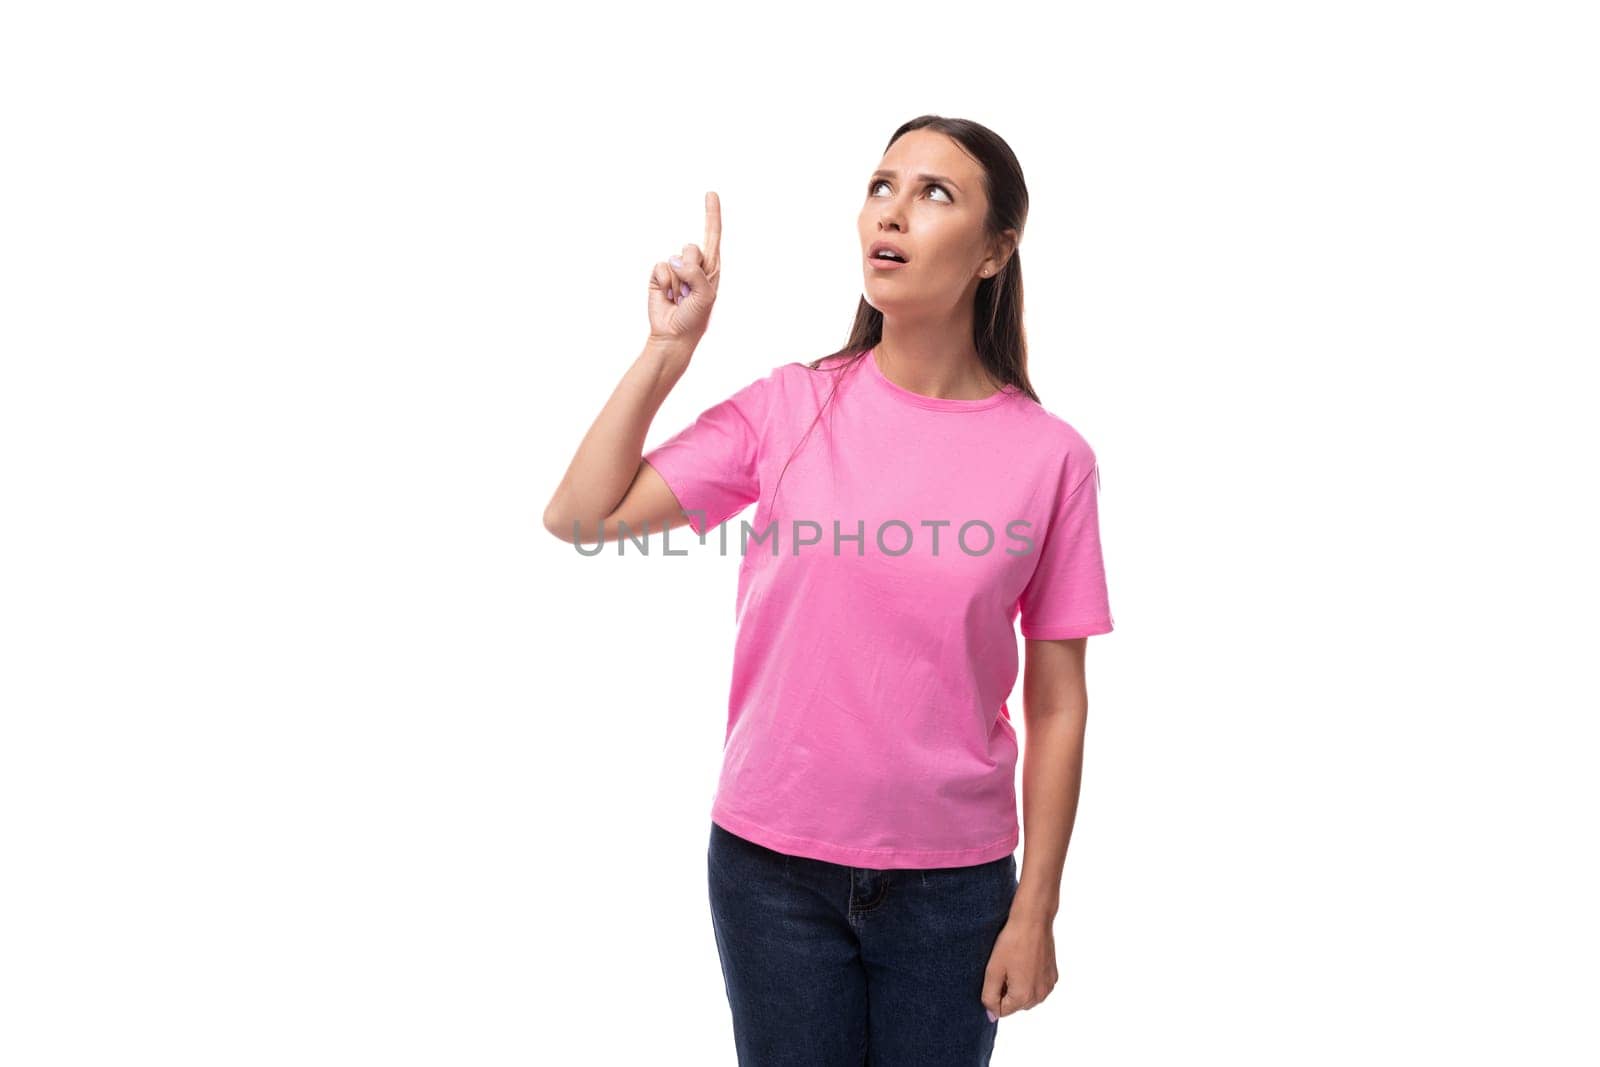 young beautiful model woman with straight black hair dressed in a pink t-shirt points her hand up by TRMK